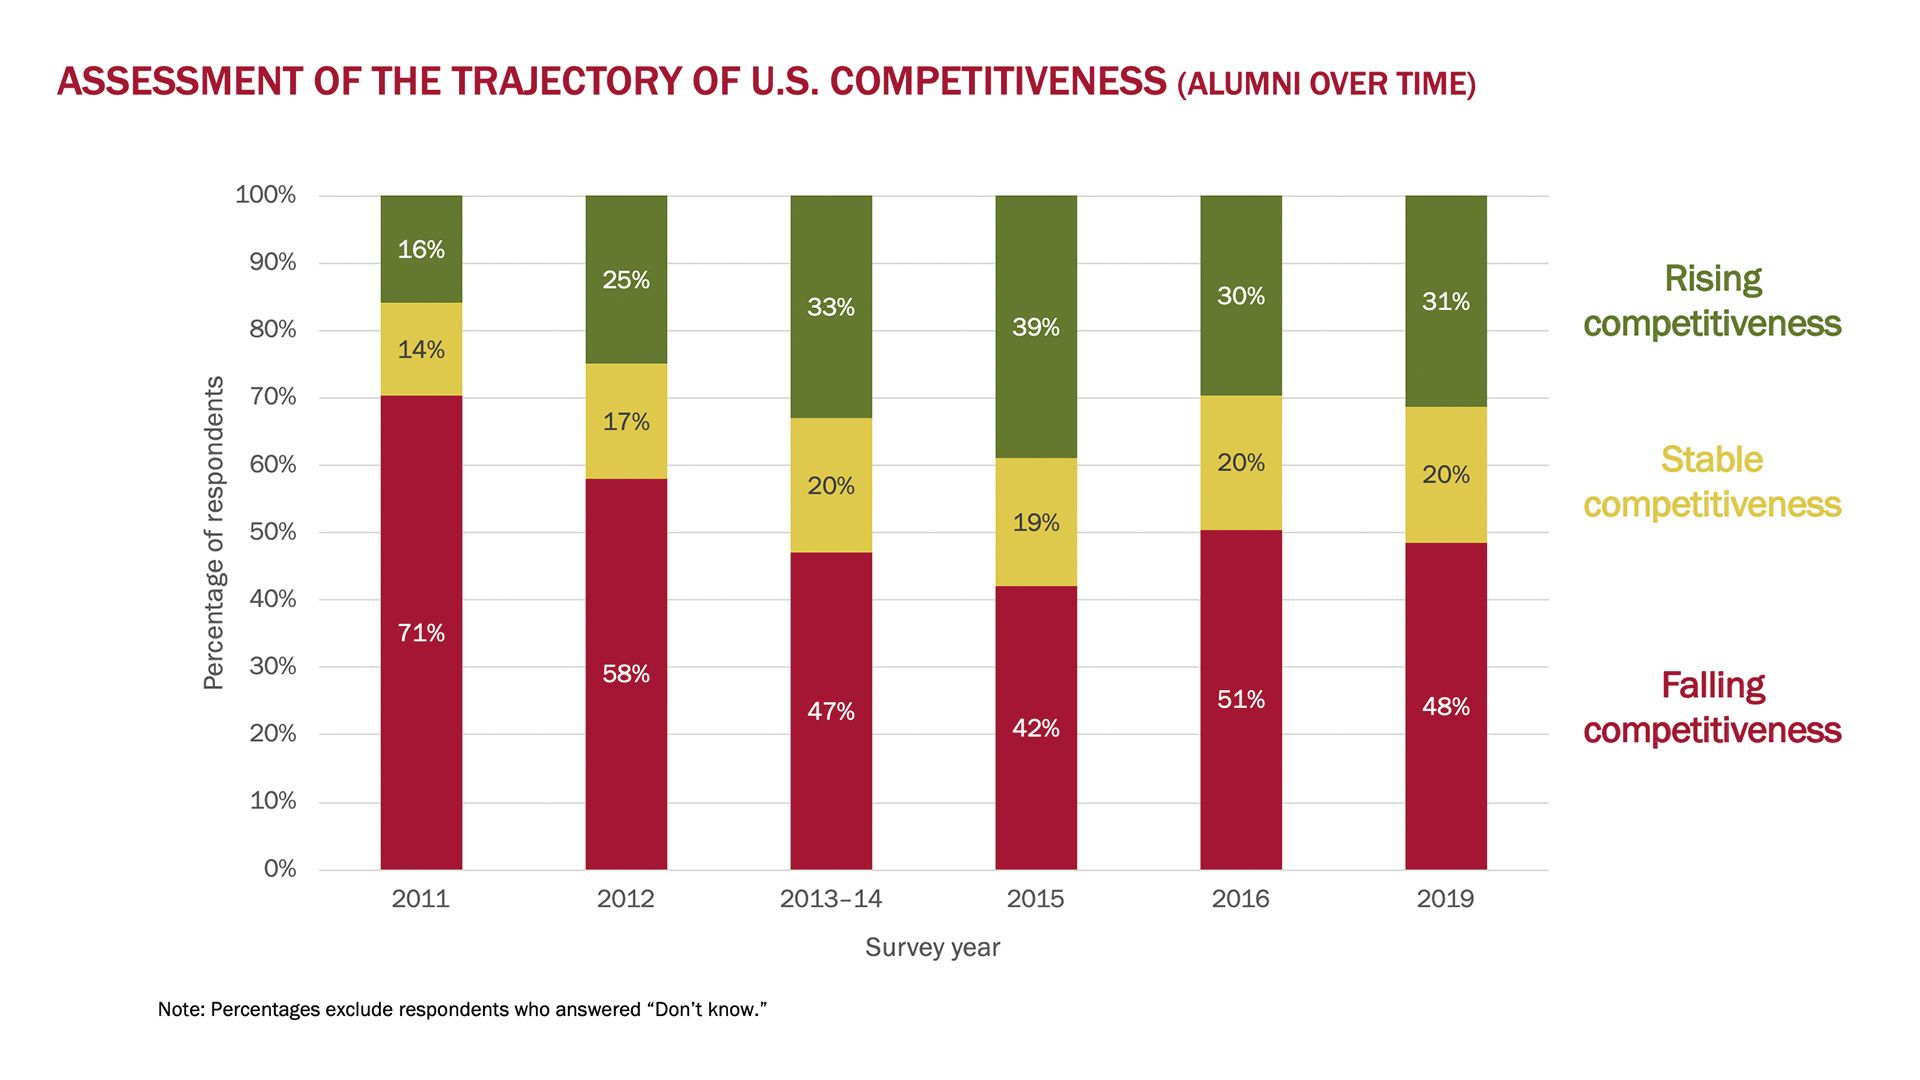 Survey results for U.S. competitiveness